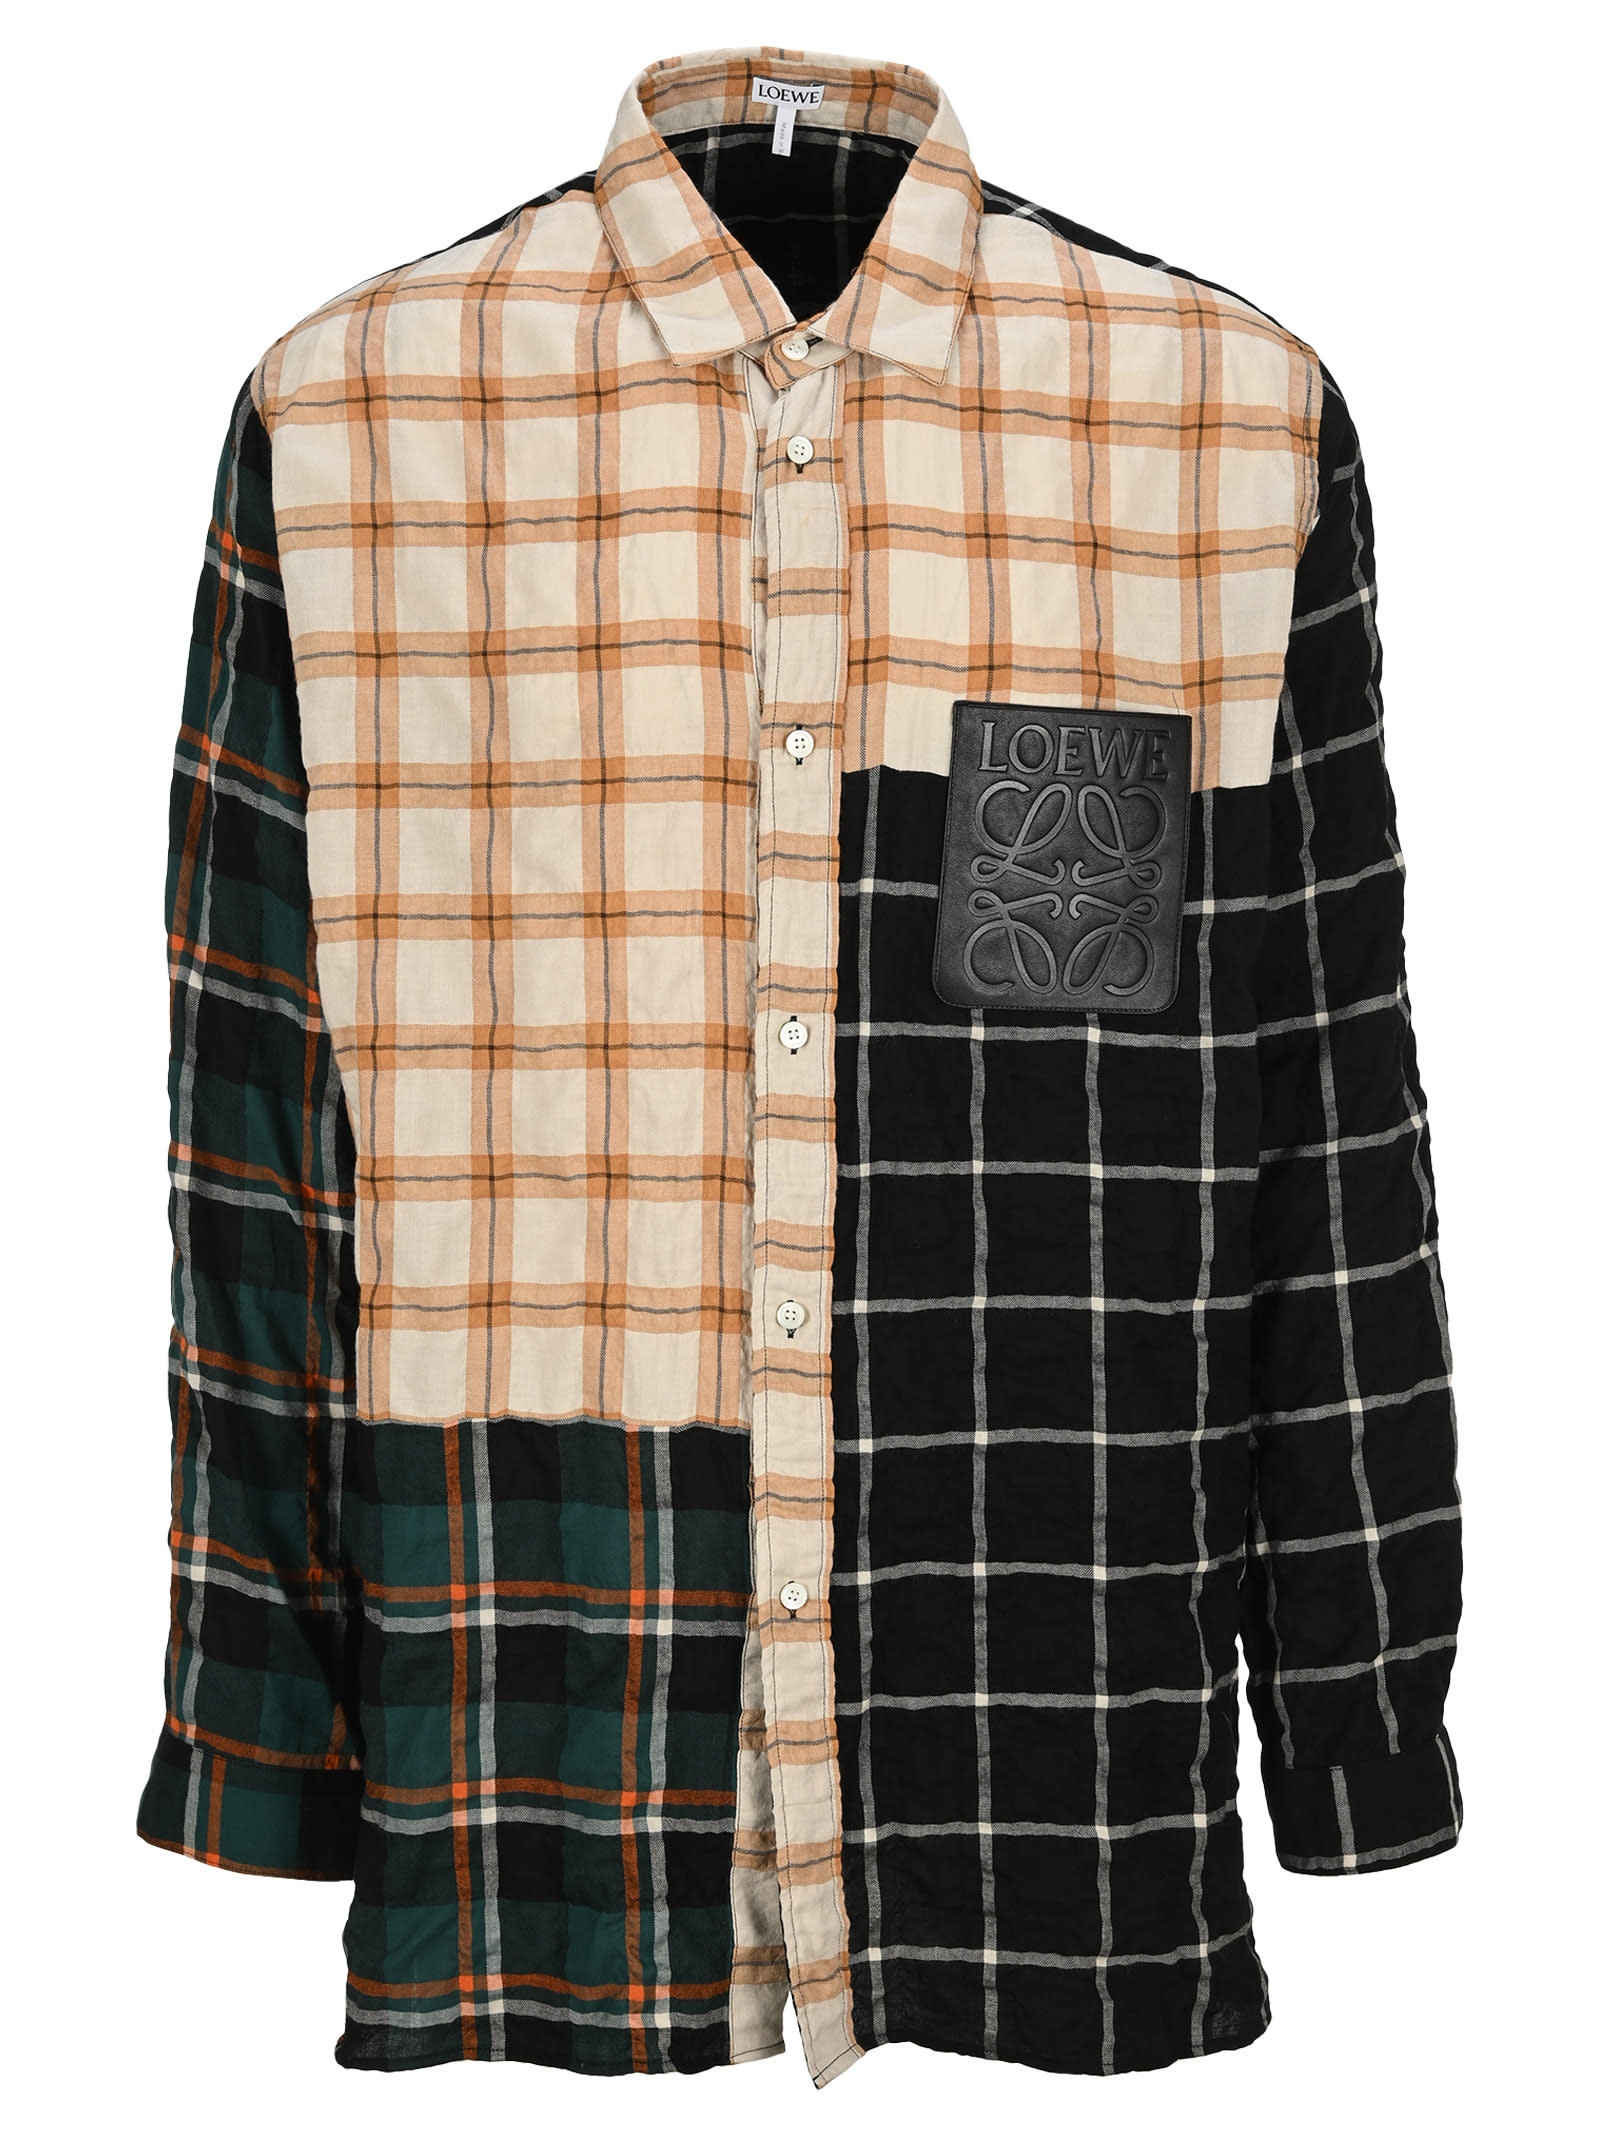 LOEWE CHECK OVERSHIRT IN COTTON AND MODAL,H526Y05W01F9900